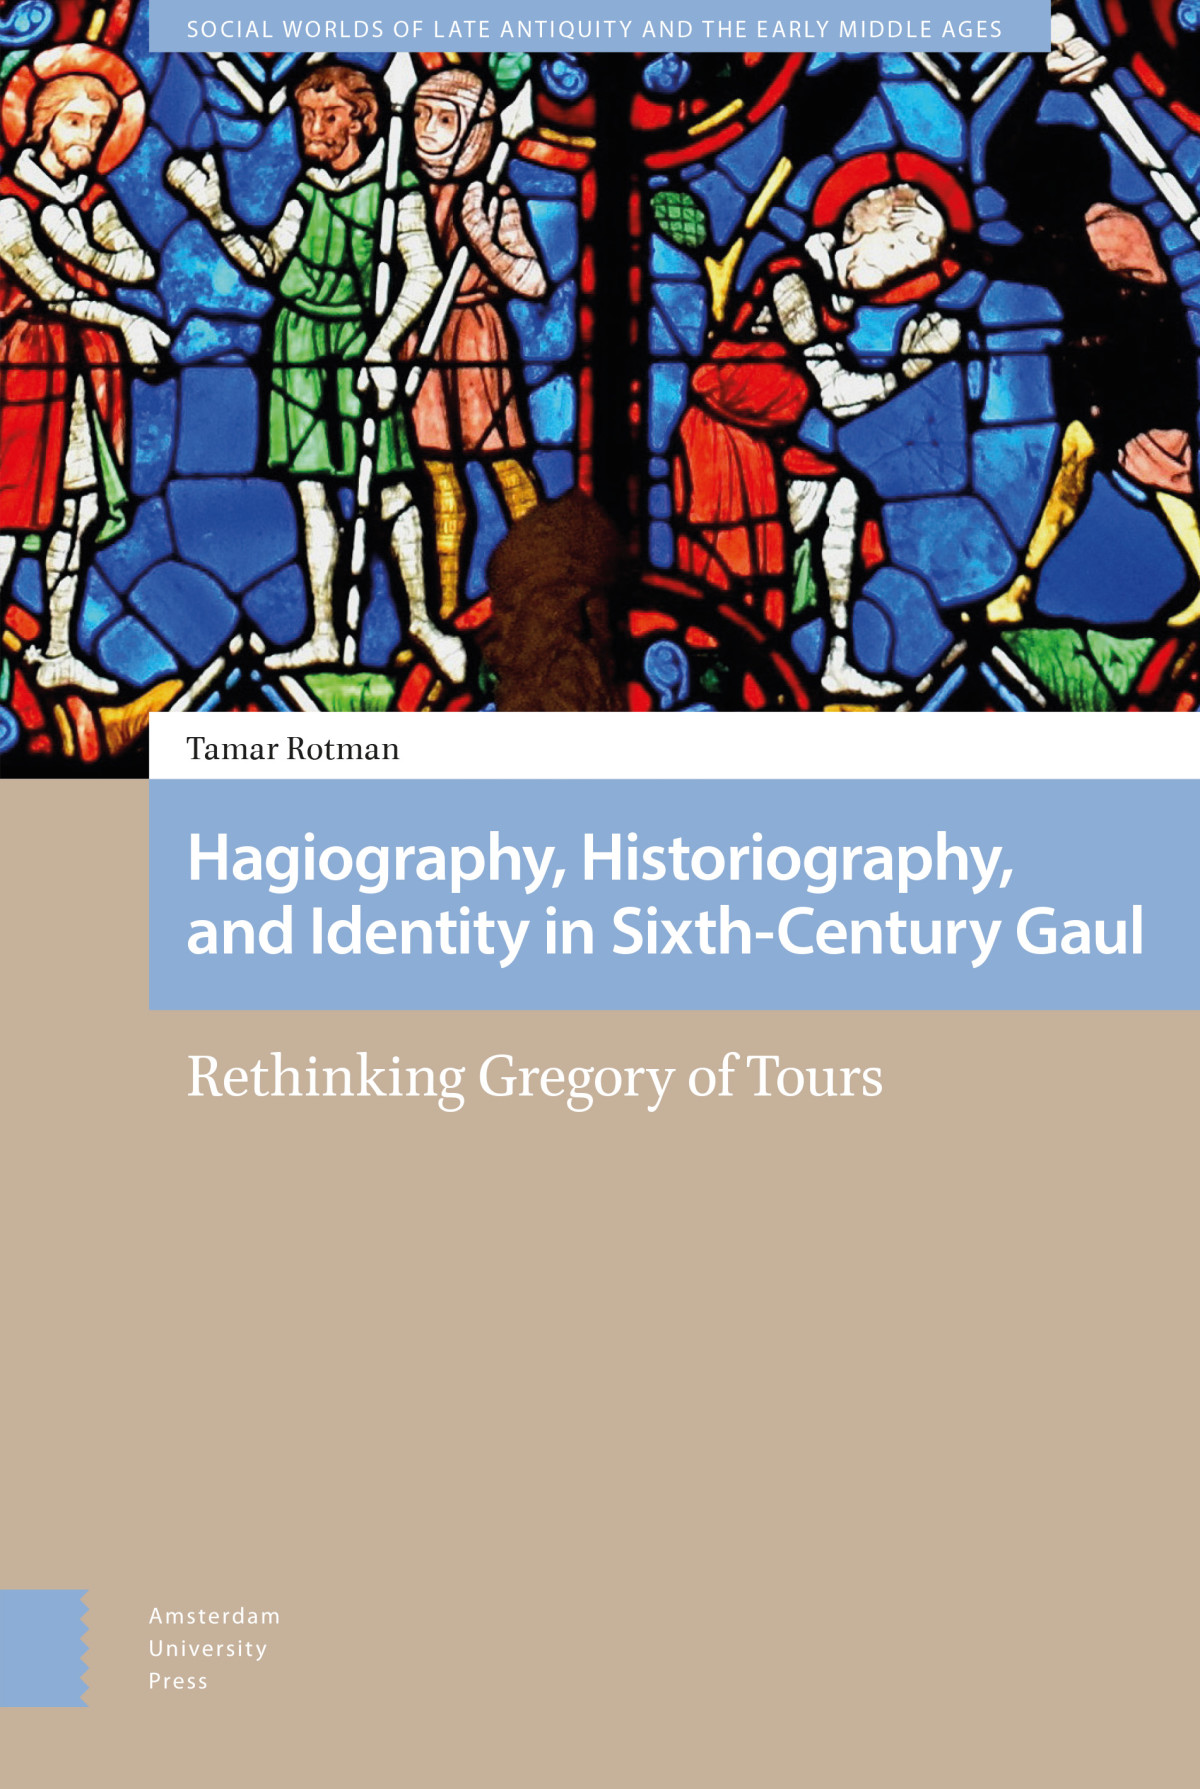 biography hagiography meaning